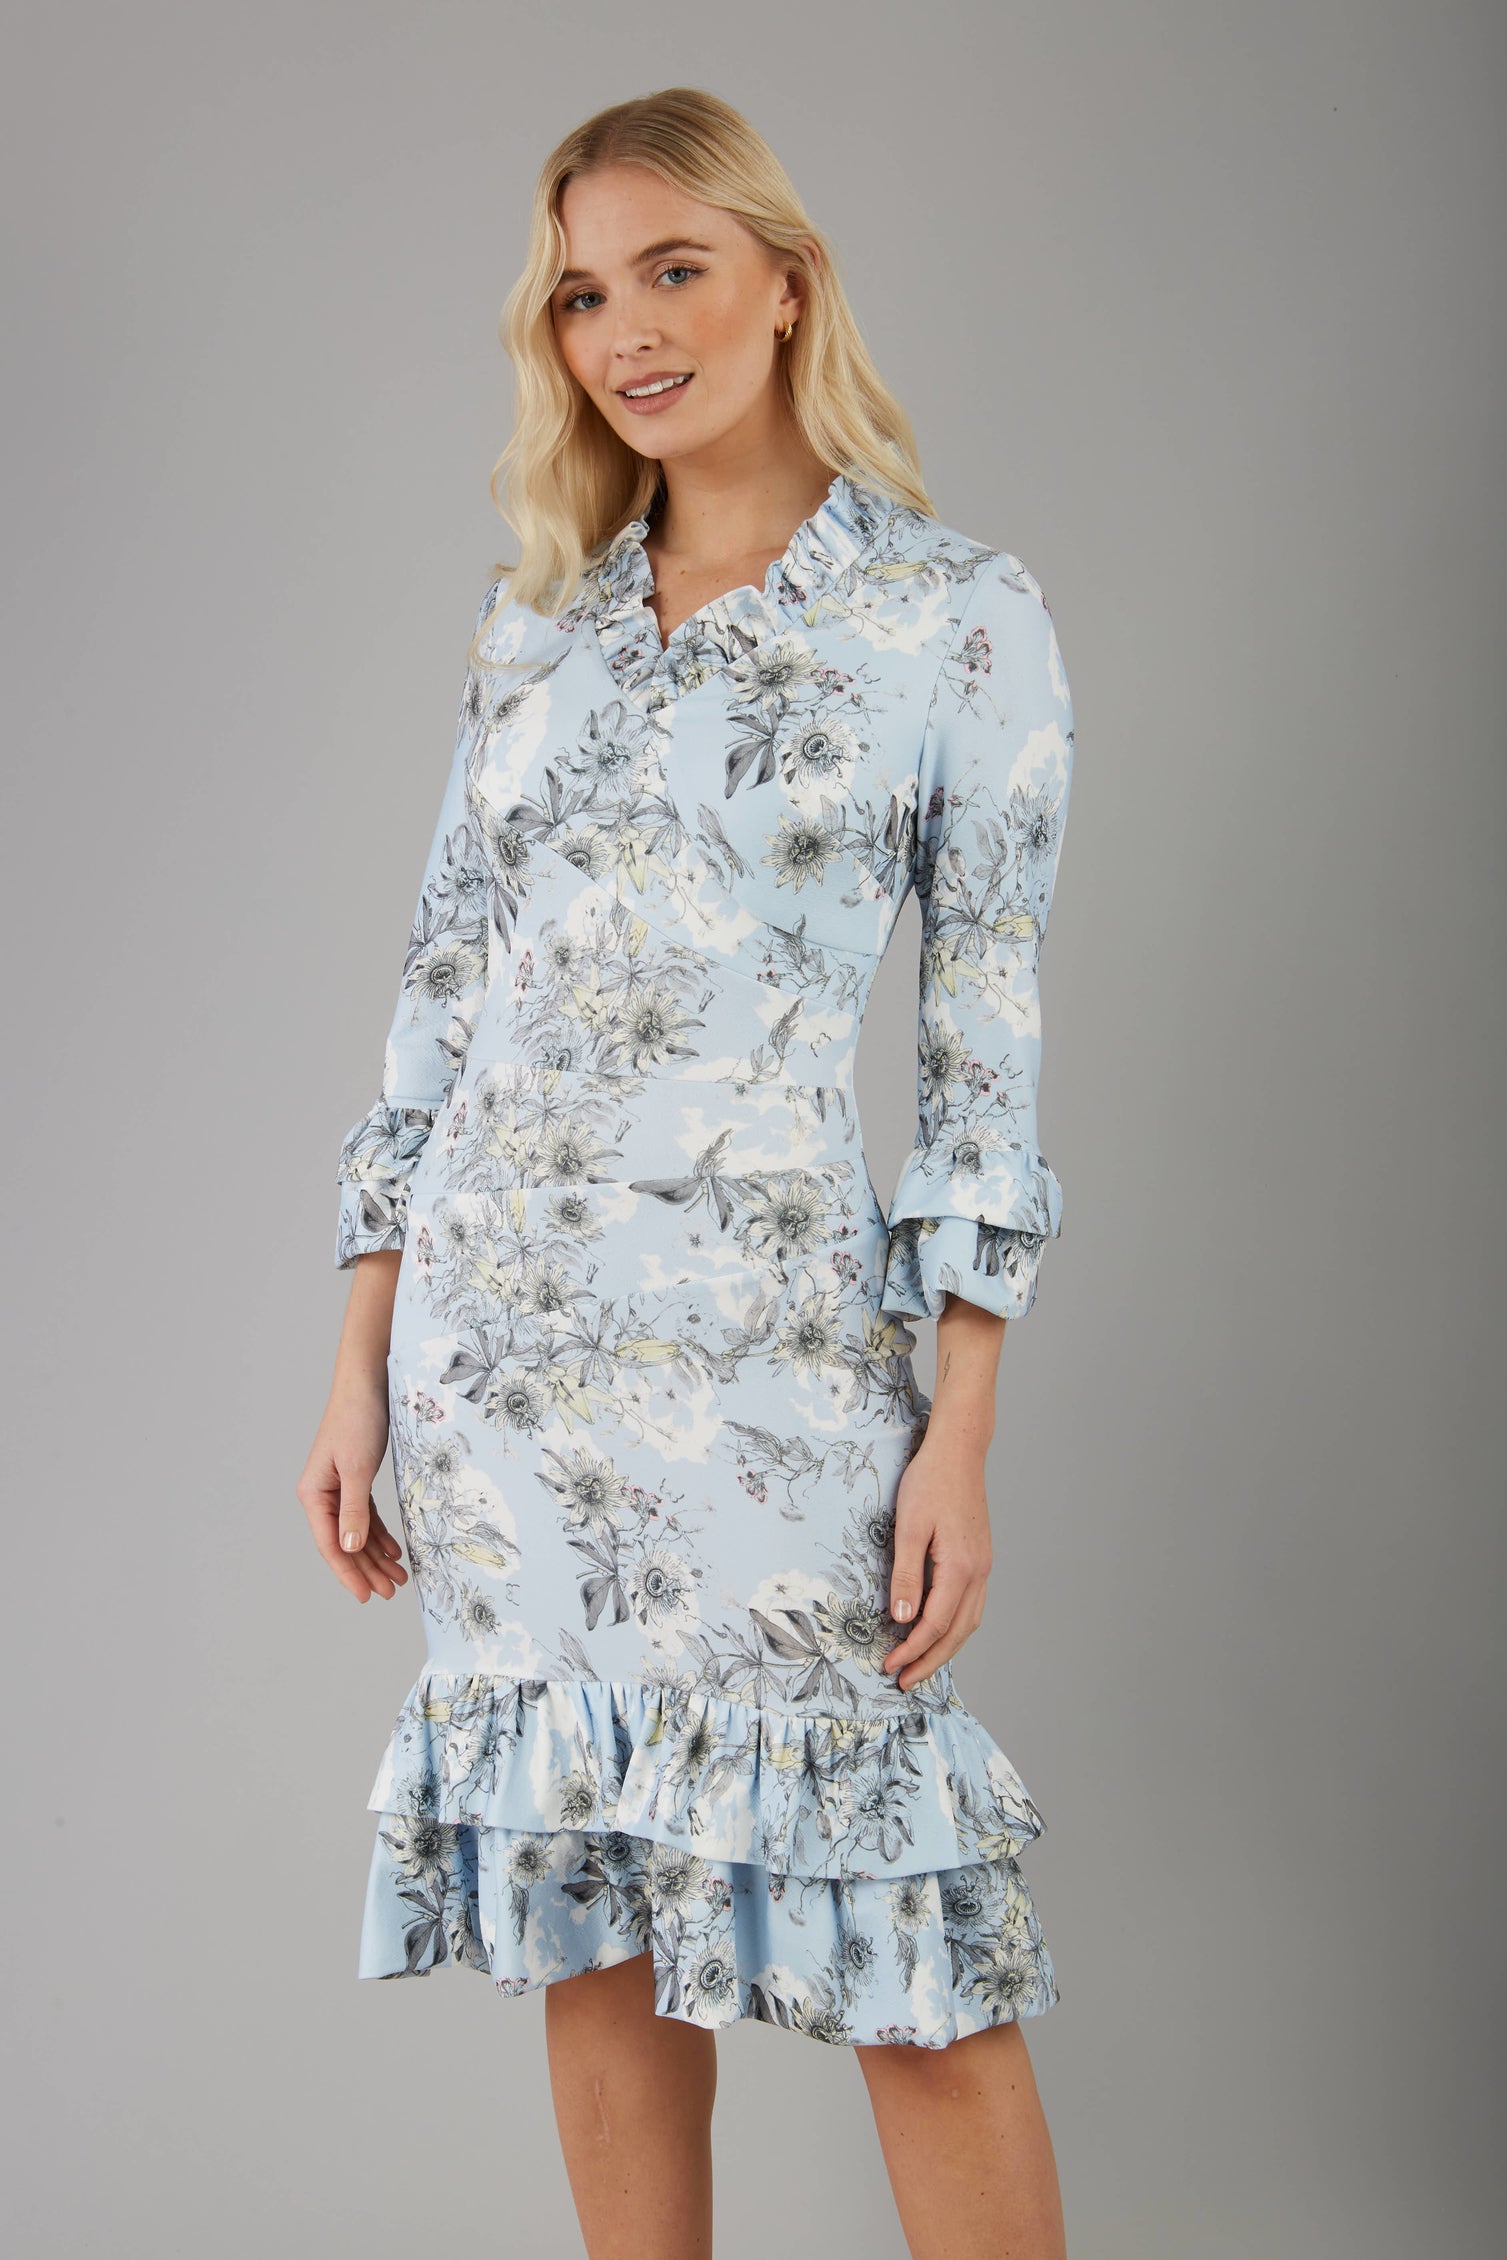 model is wearing diva catwalk fern printed dress with rushes and sleeves in light blue front